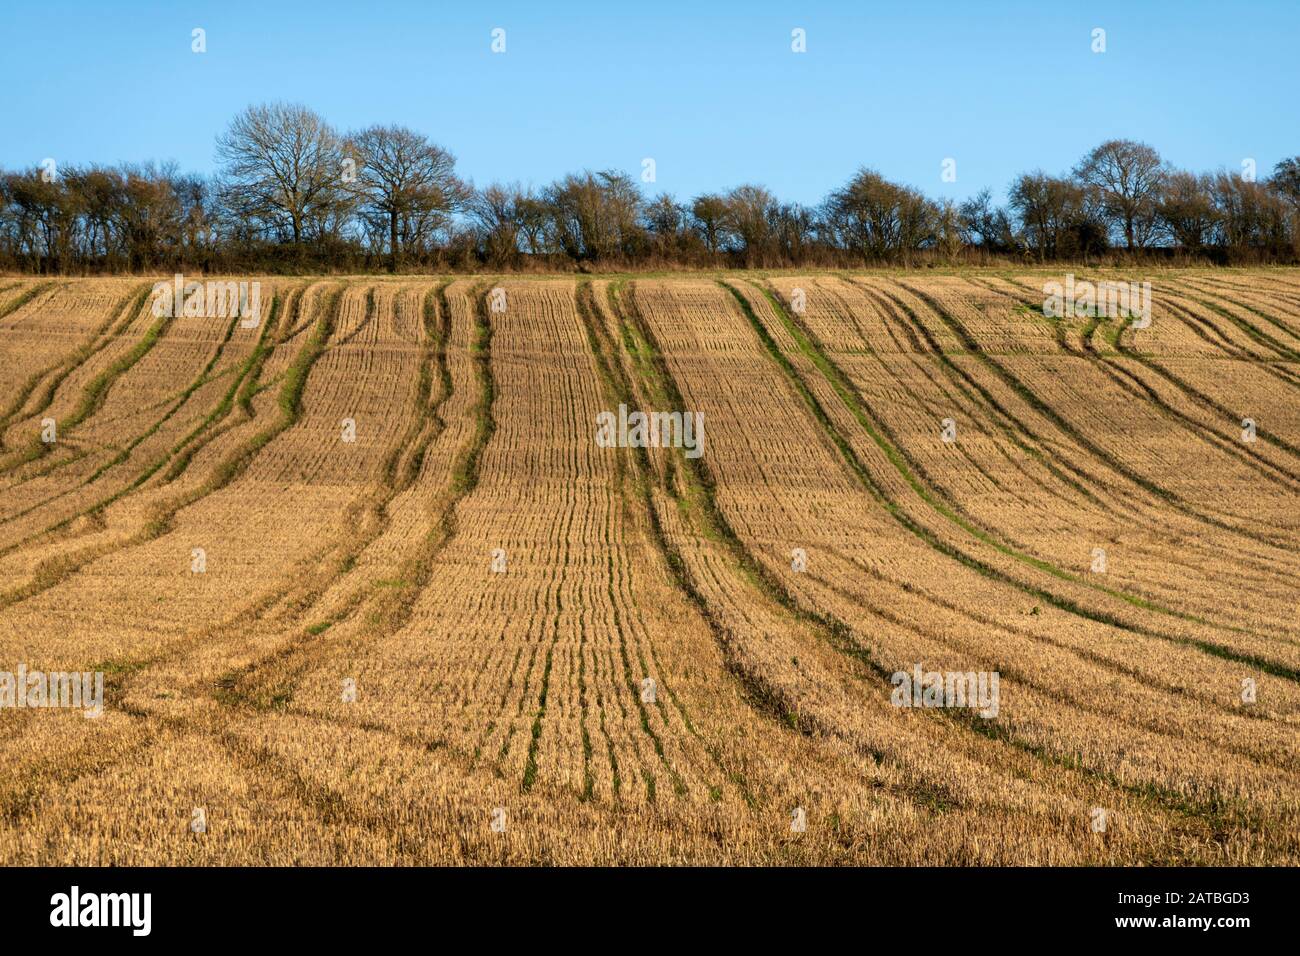 Tractor tyre lines in field of stubble in winter, East Garston, West Berkshire, England, United Kingdom, Europe Stock Photo